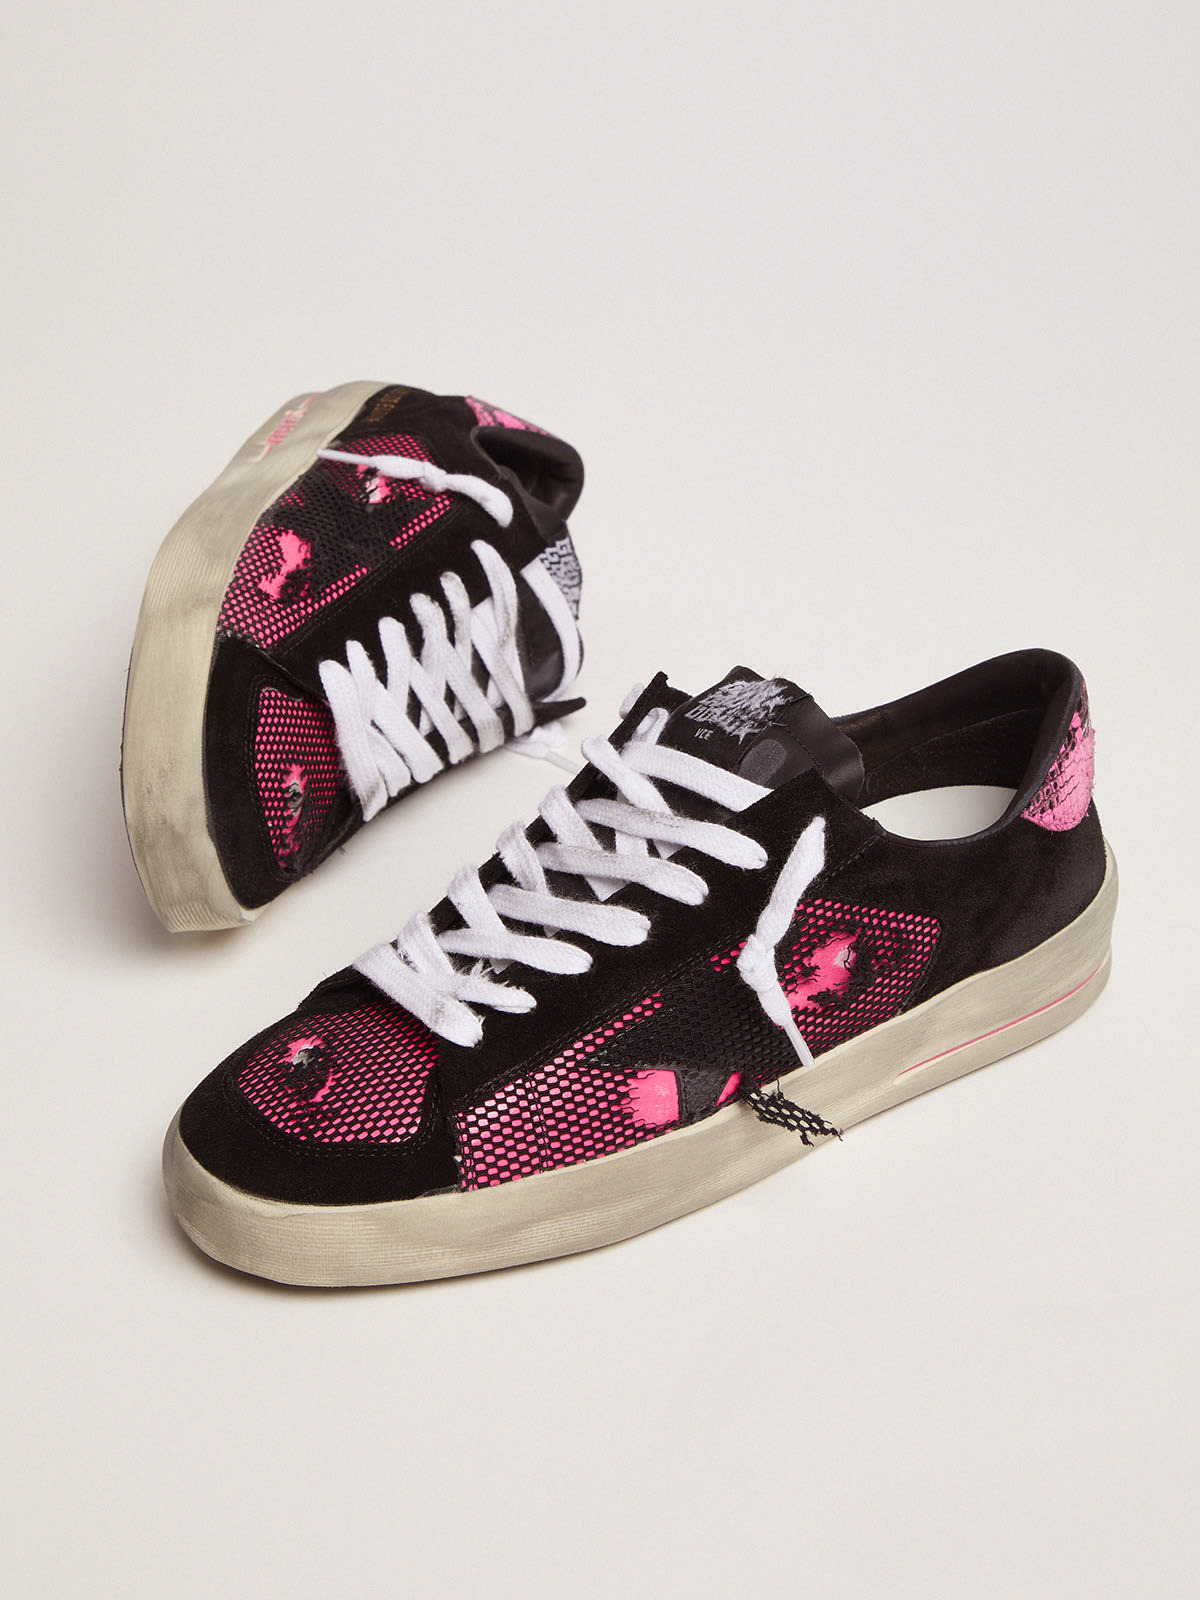 Golden Goose - Women’s fuchsia and black Limited Edition LAB Stardan sneakers in 